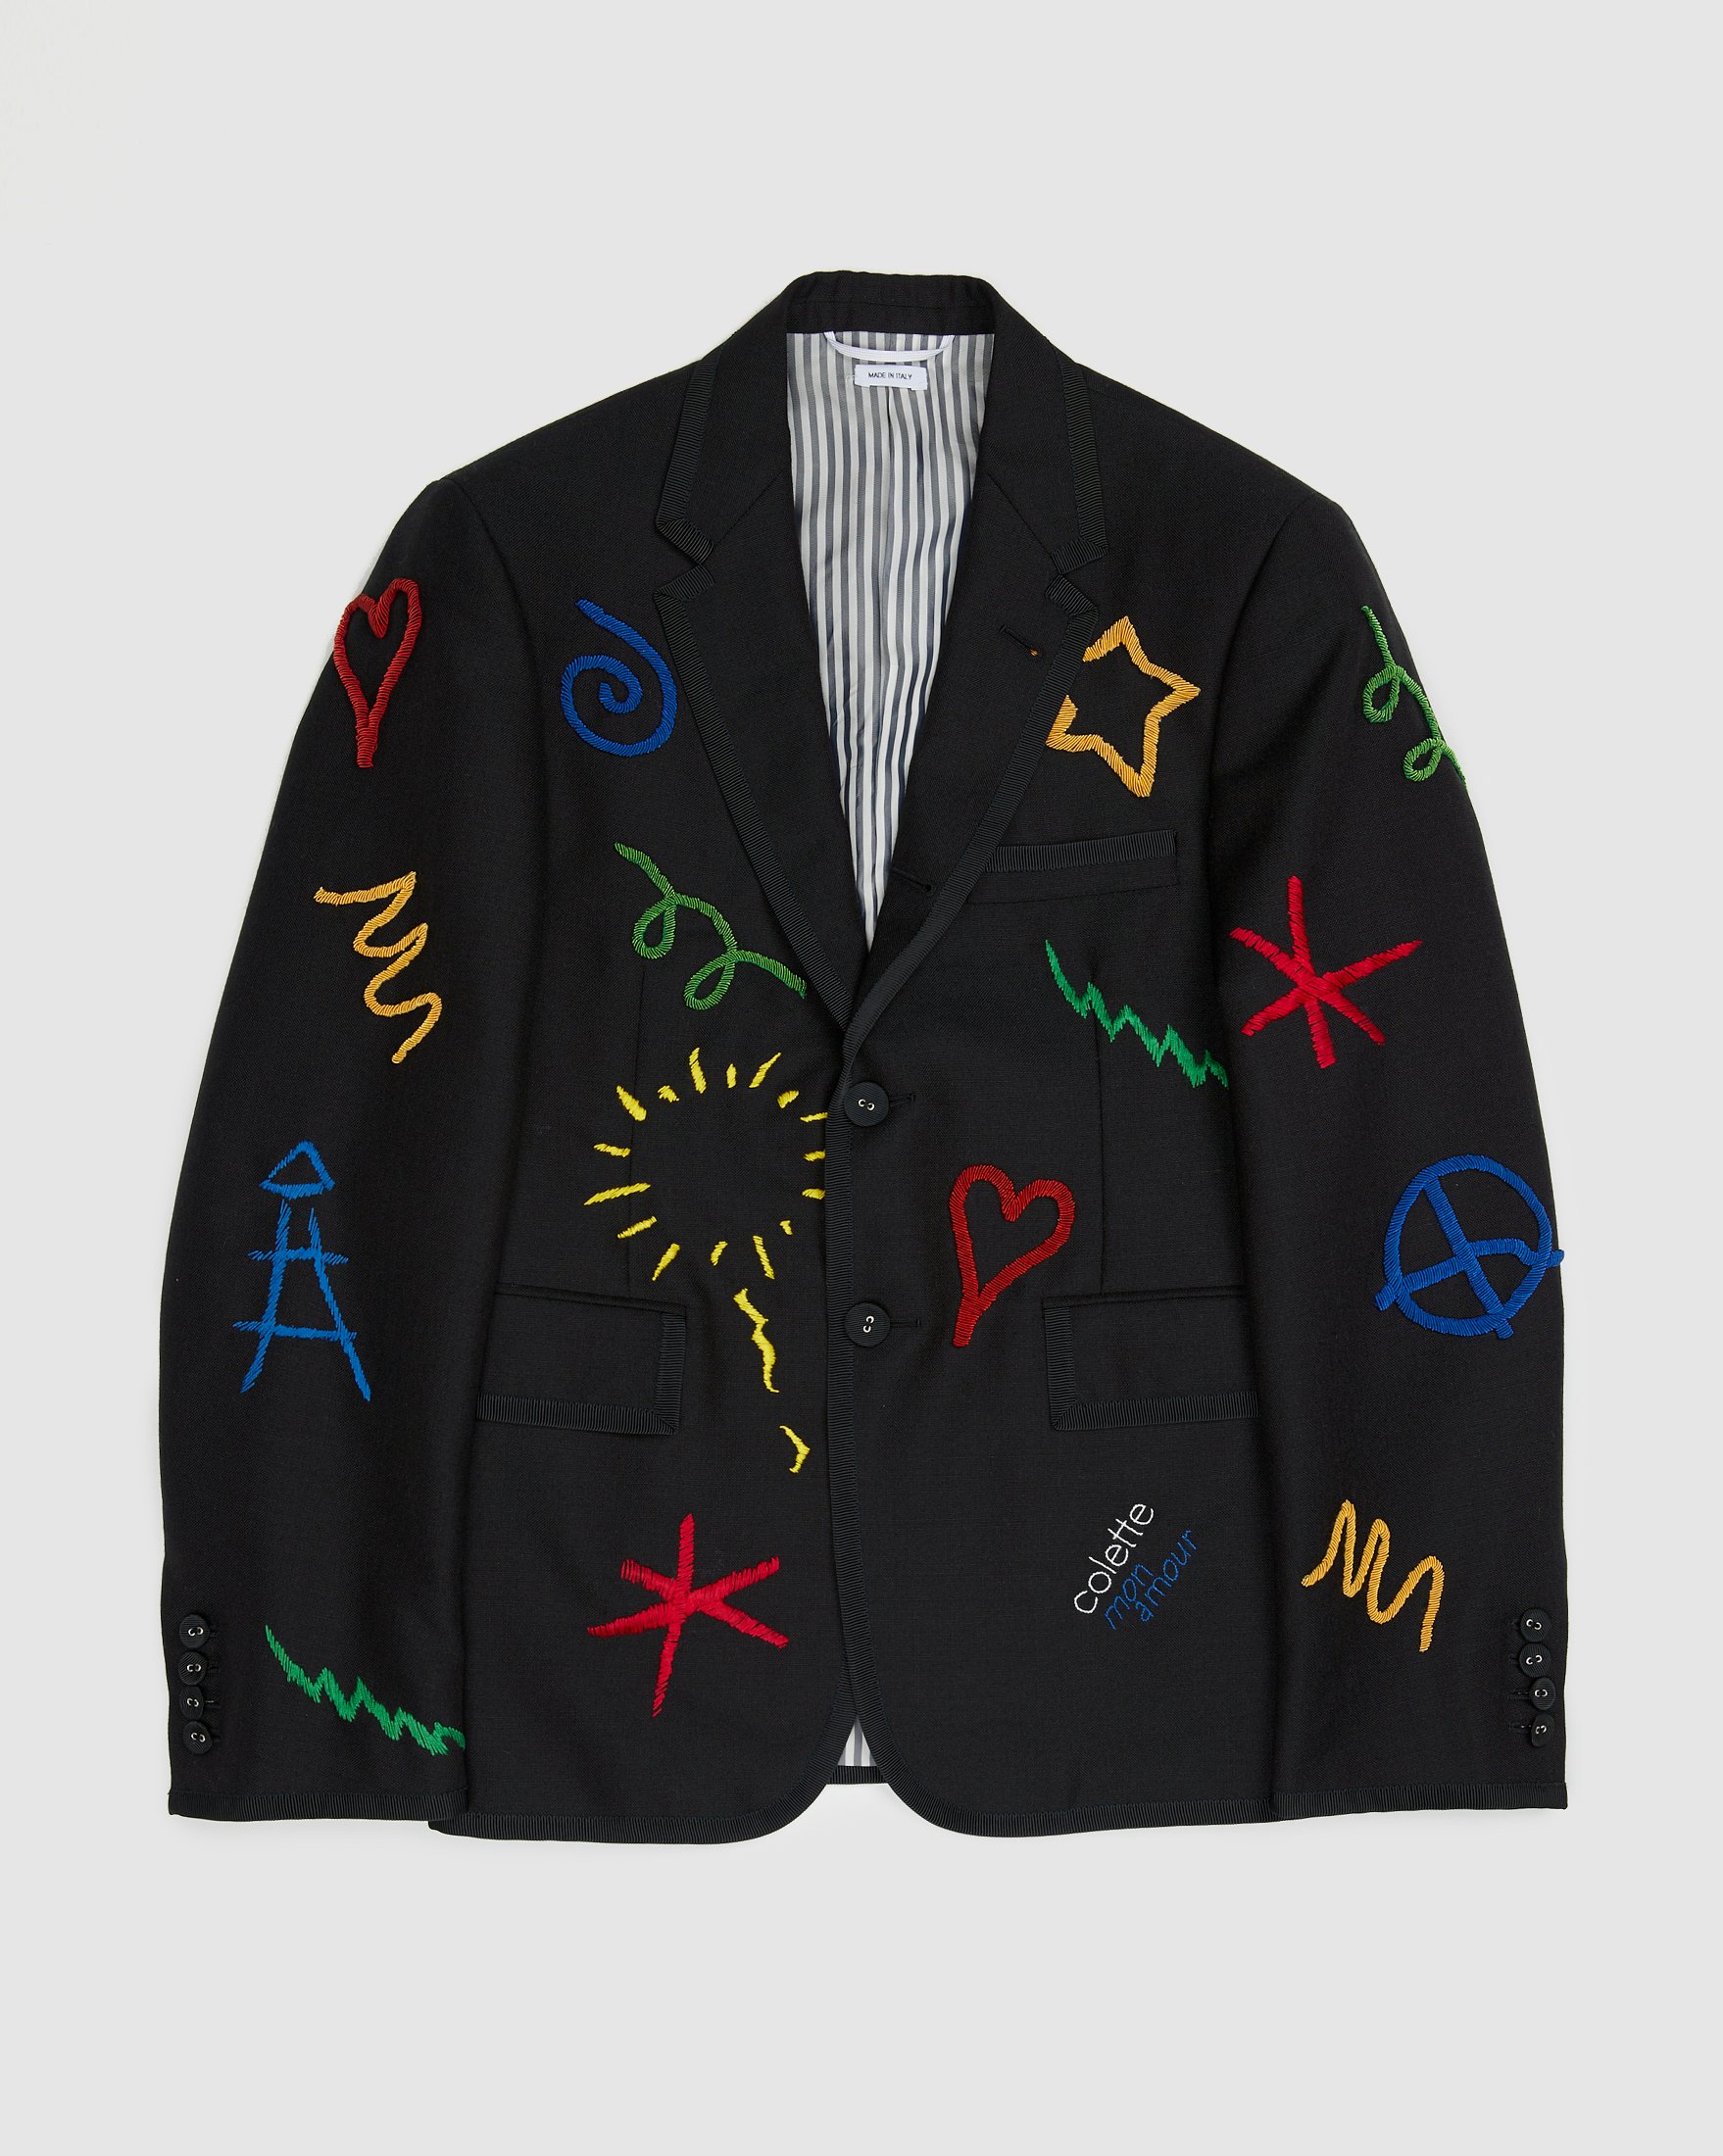 Colette Mon Amour x Thom Browne - Black Embroidered Tux Suit - Clothing - Grey - Image 3